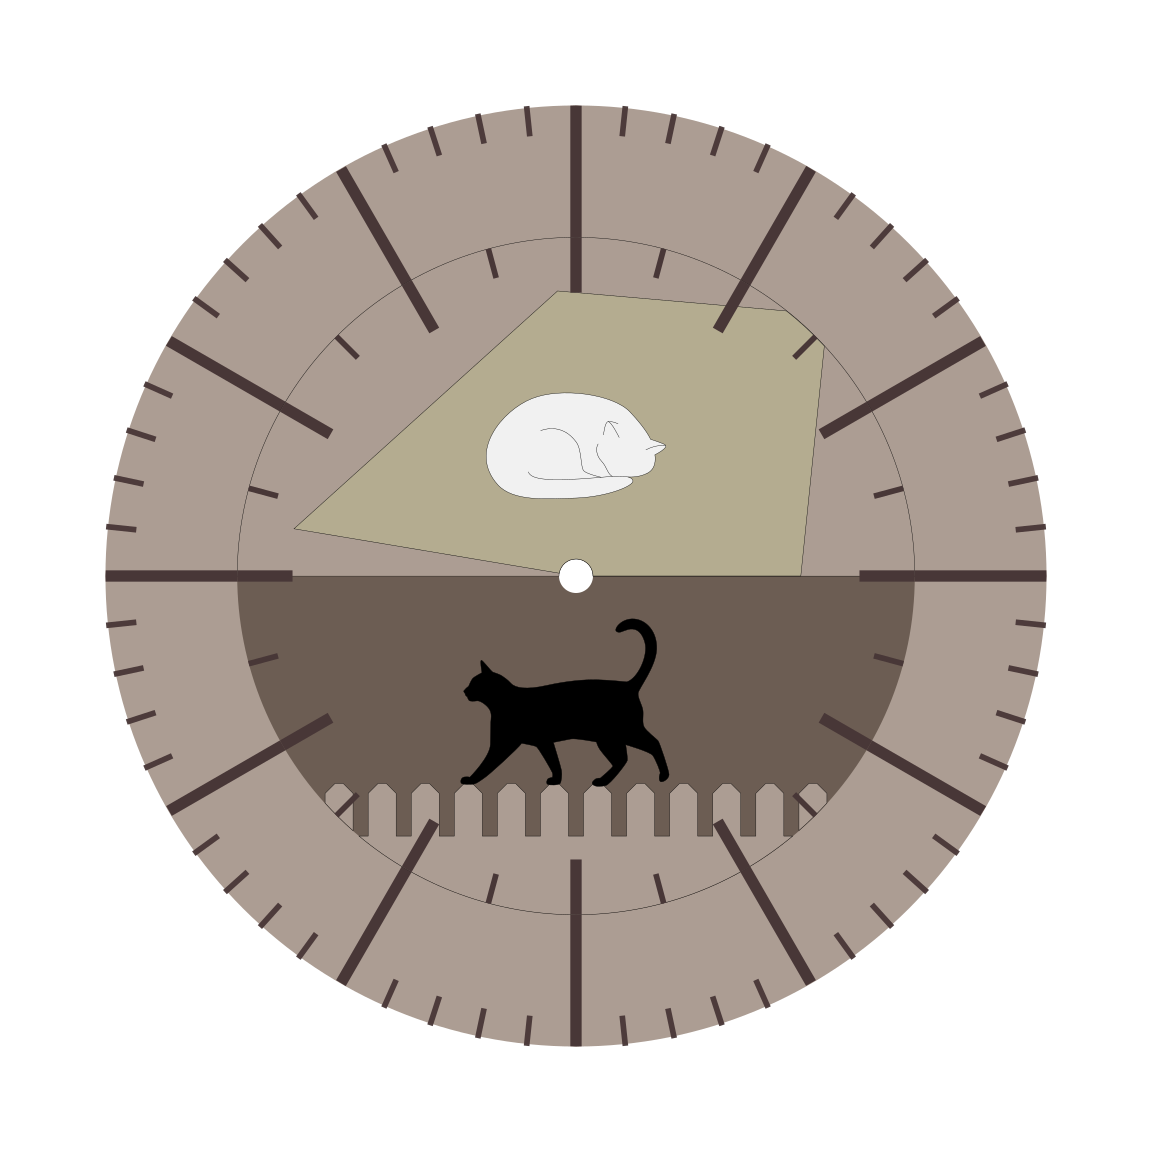 computer rendering of a clock with two images of cats